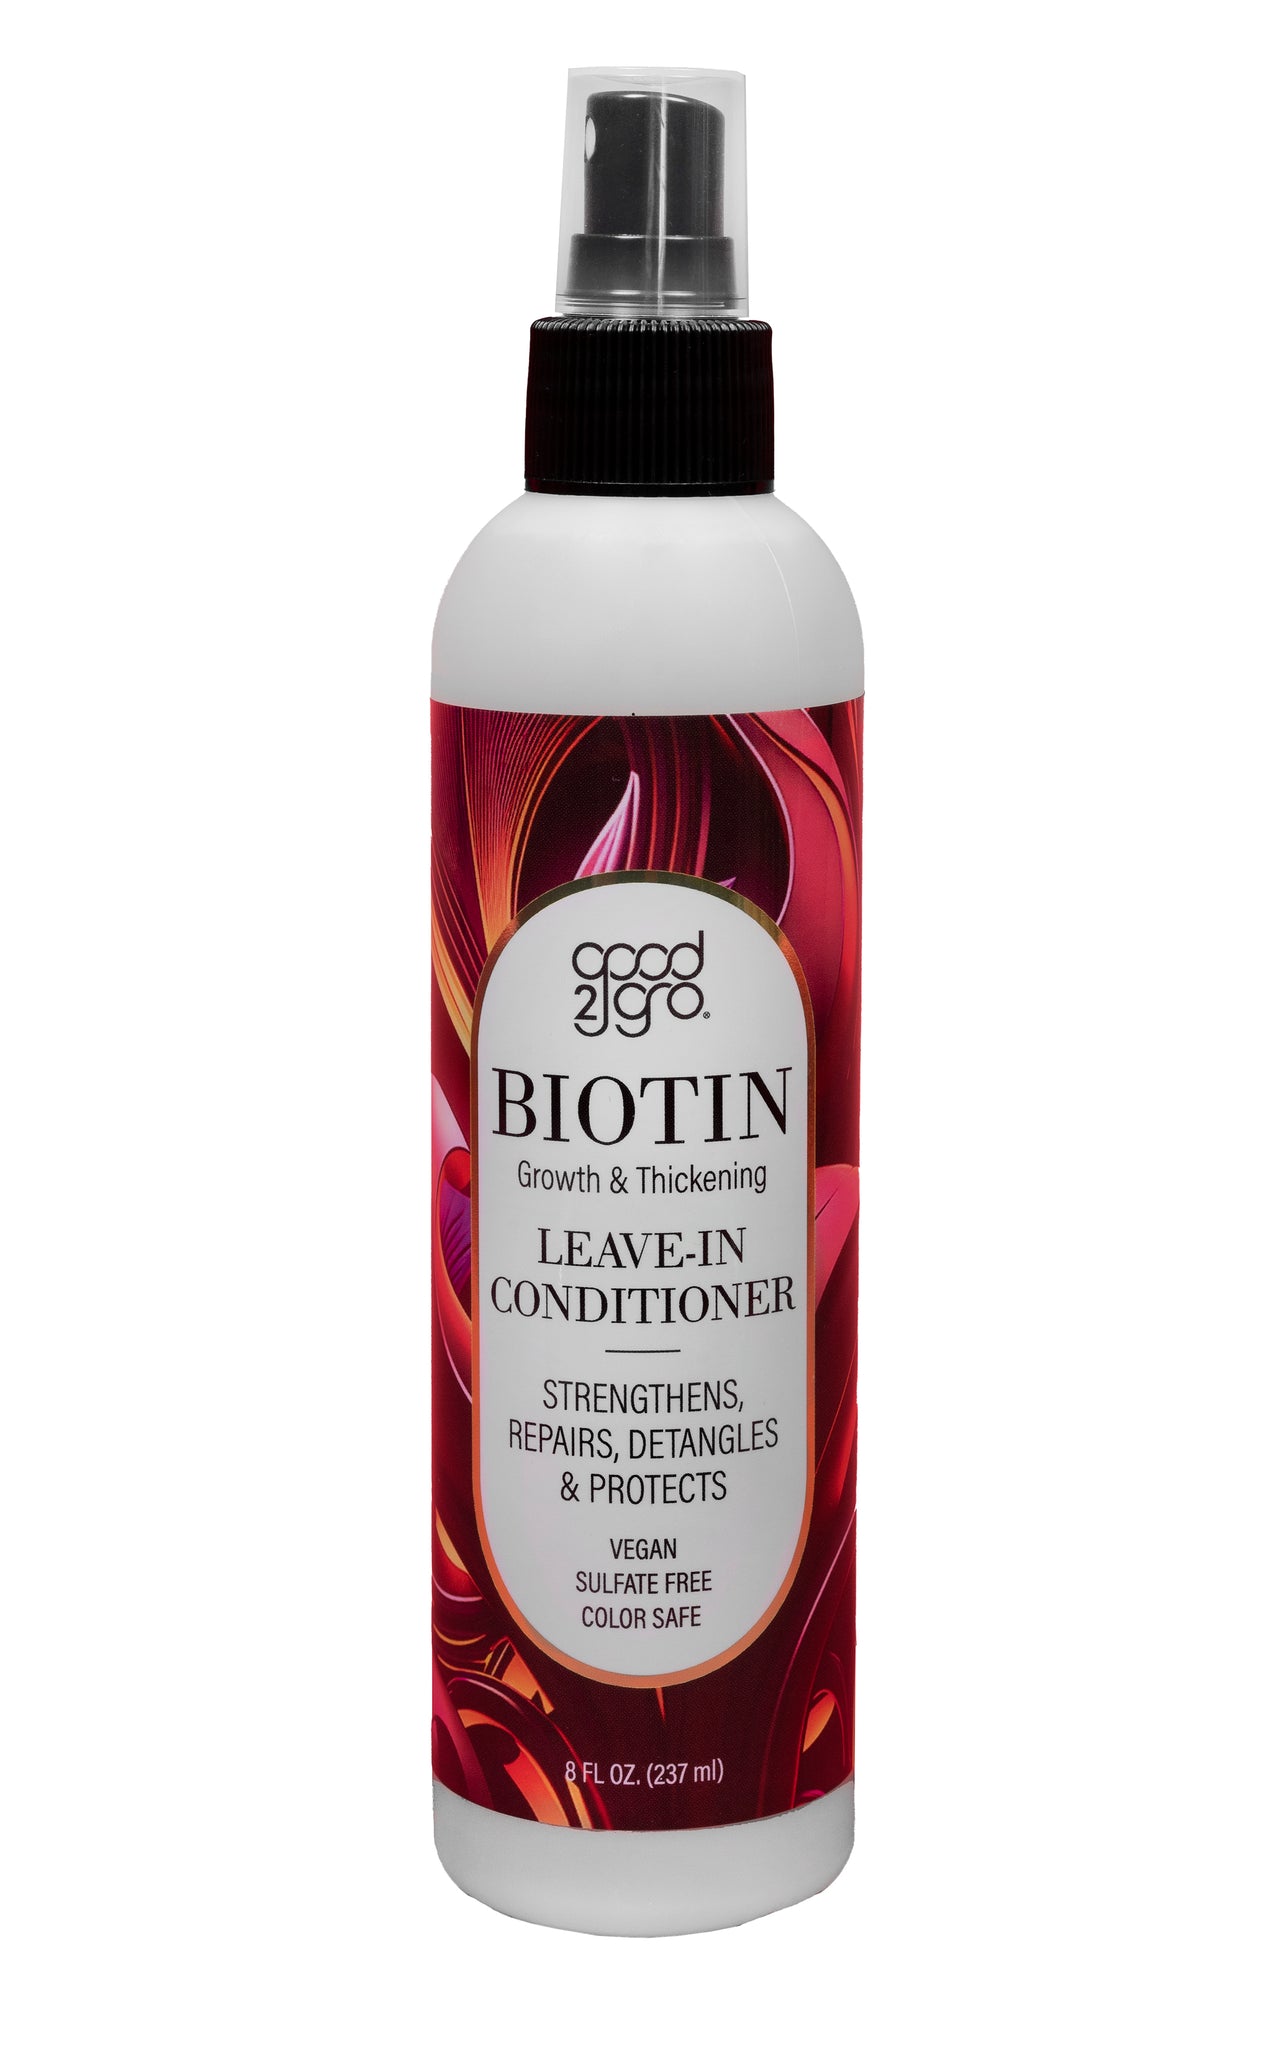 Good2Gro Growth & Thickening Leave-In Conditioner, with Biotin & Collagen, Improves Hair Loss & Thinning, Adds Moisture, Repairs, Protects & Restores Healthy Hair 8oz.